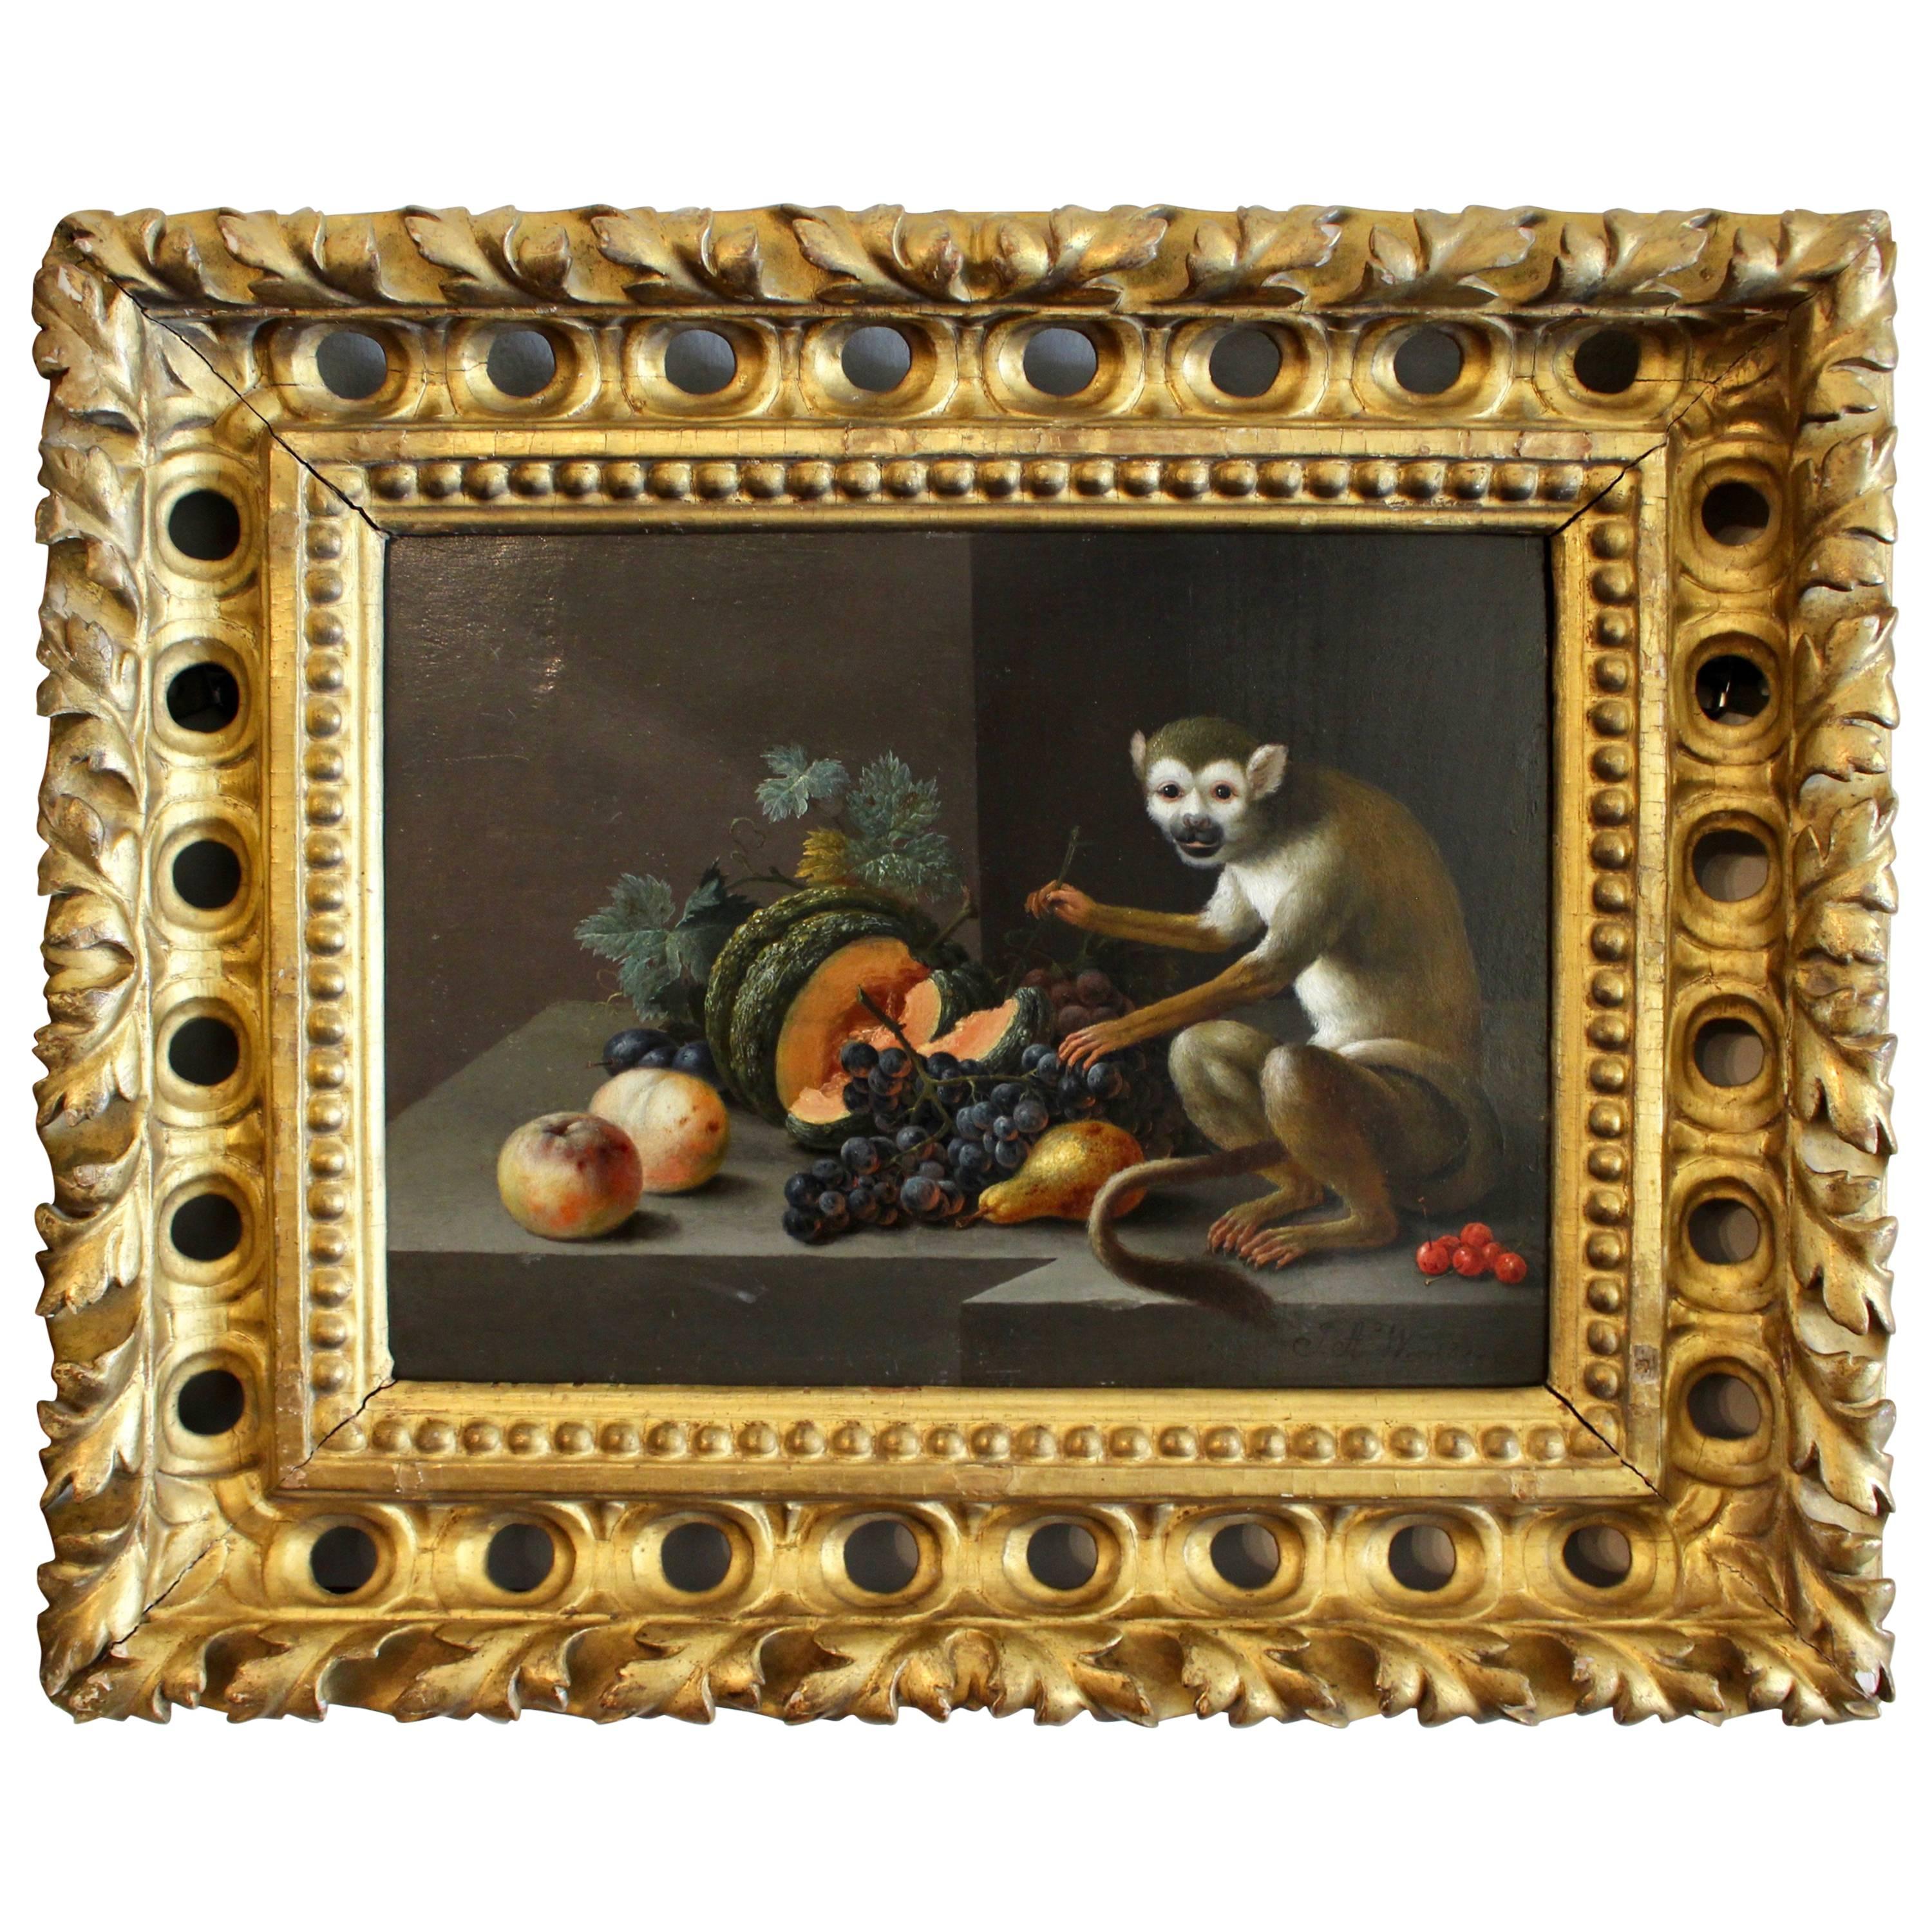 Charming Image in Still Life Fashion of a Monkey with Various Fruit